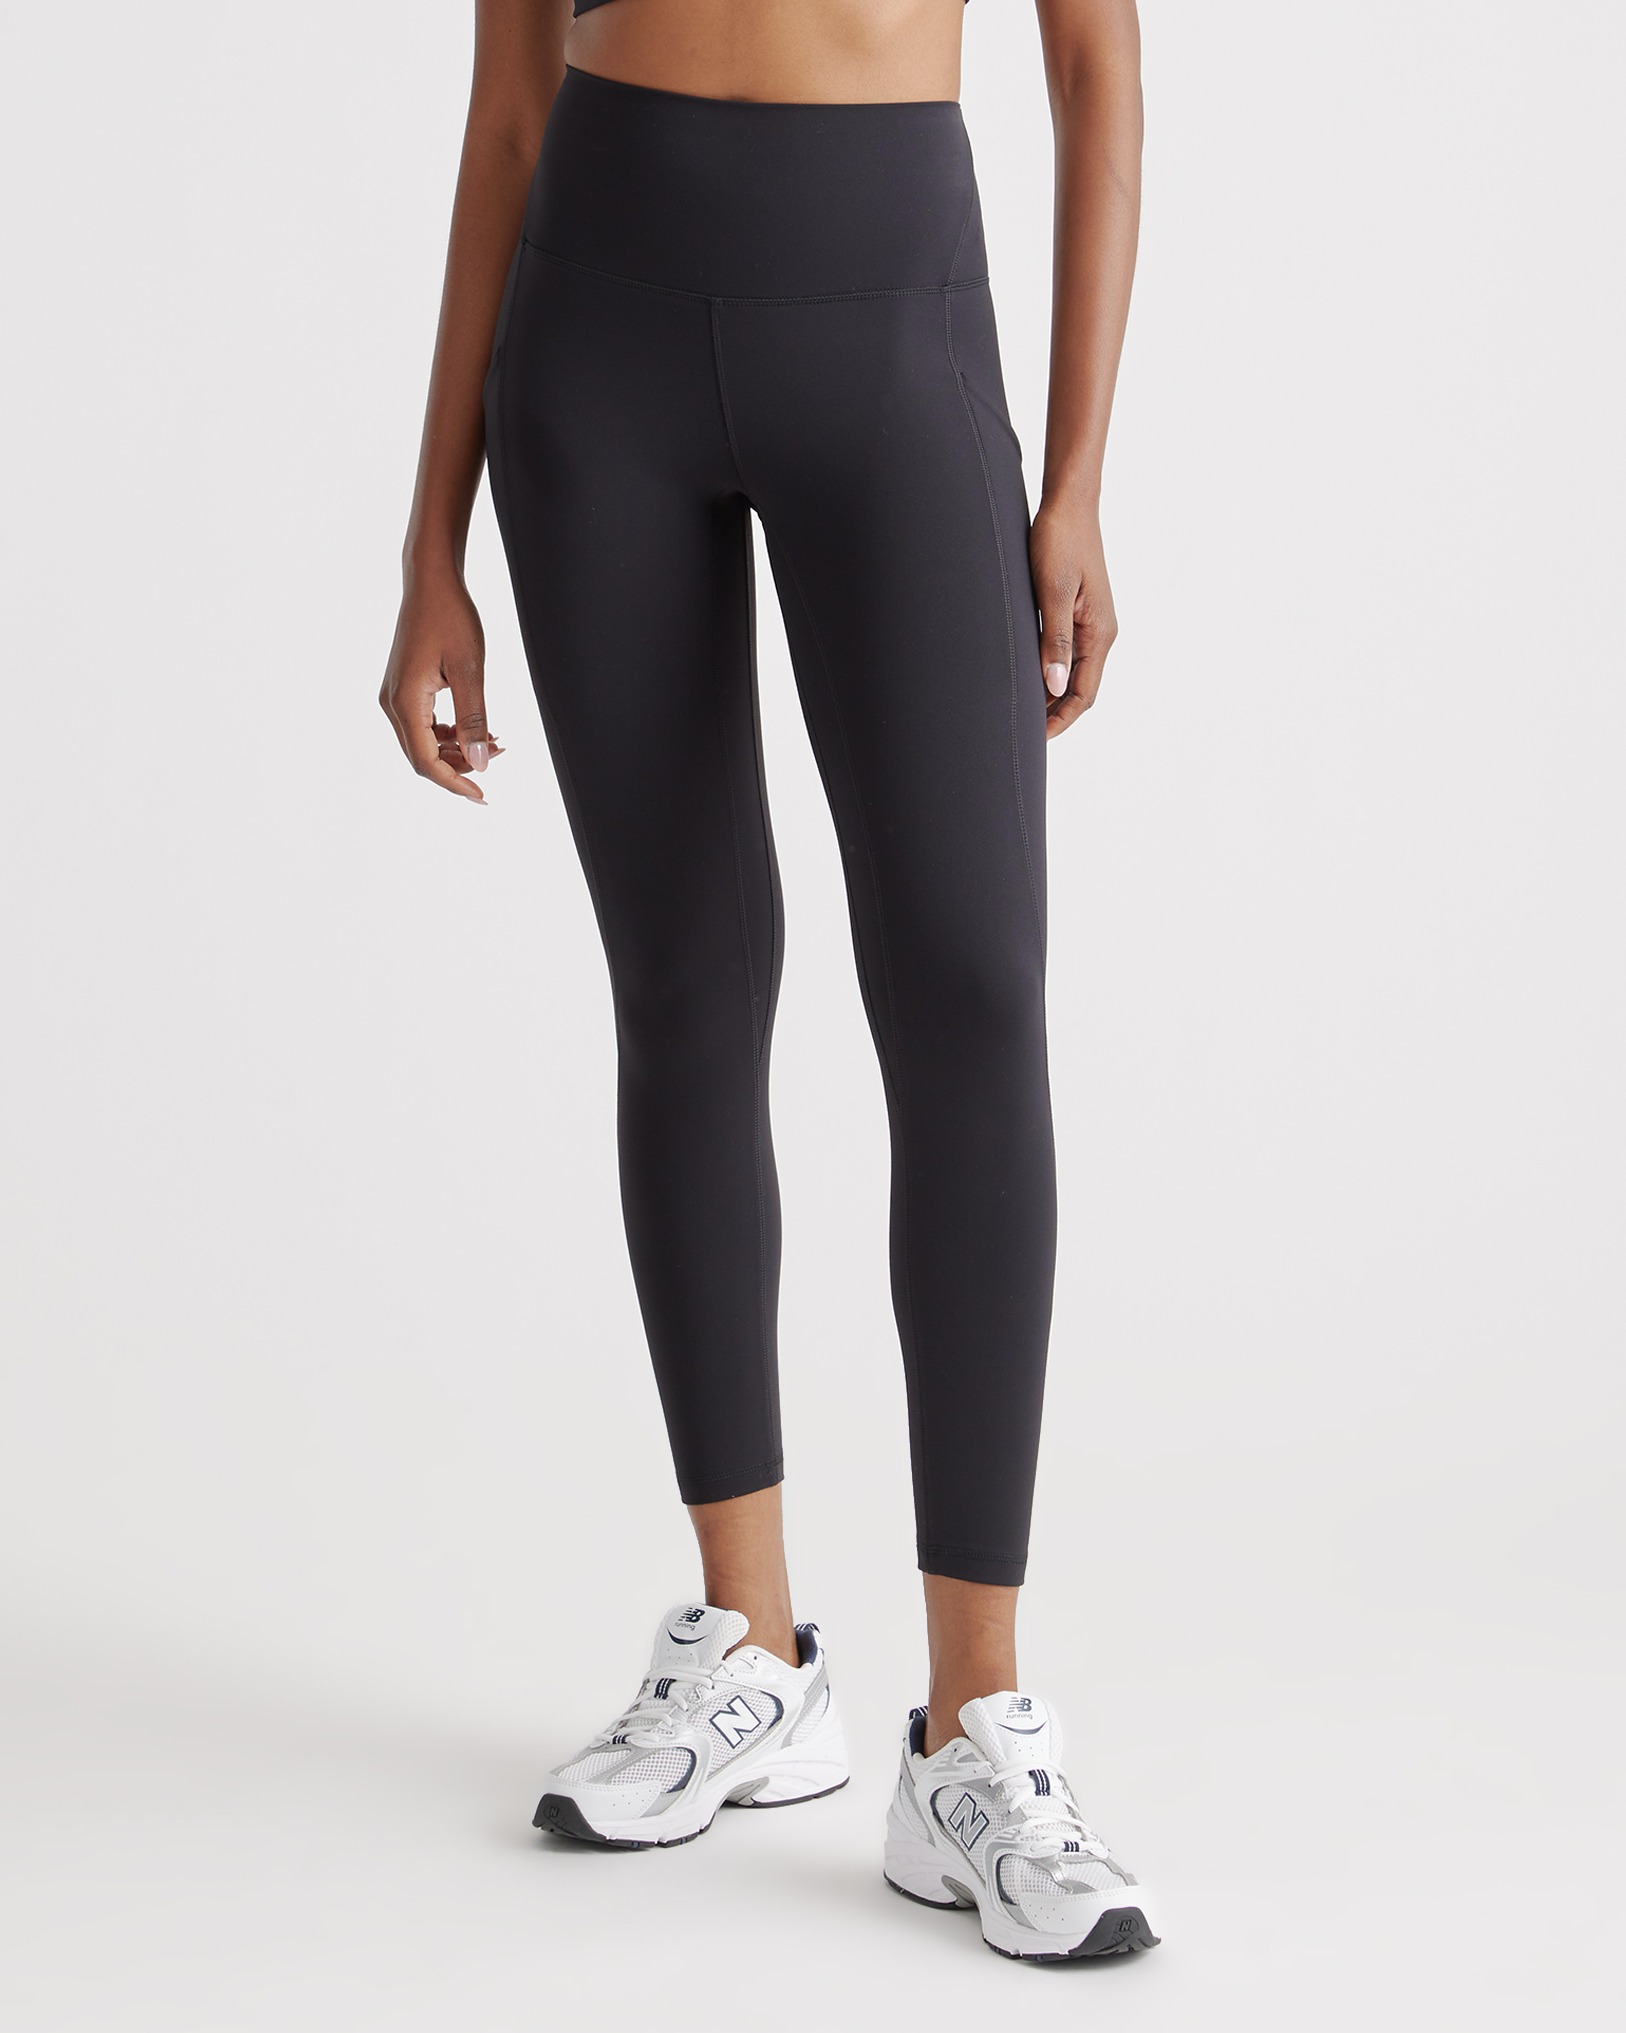 High-Waisted Neon Ankle Length Leggings with 3 Pockets